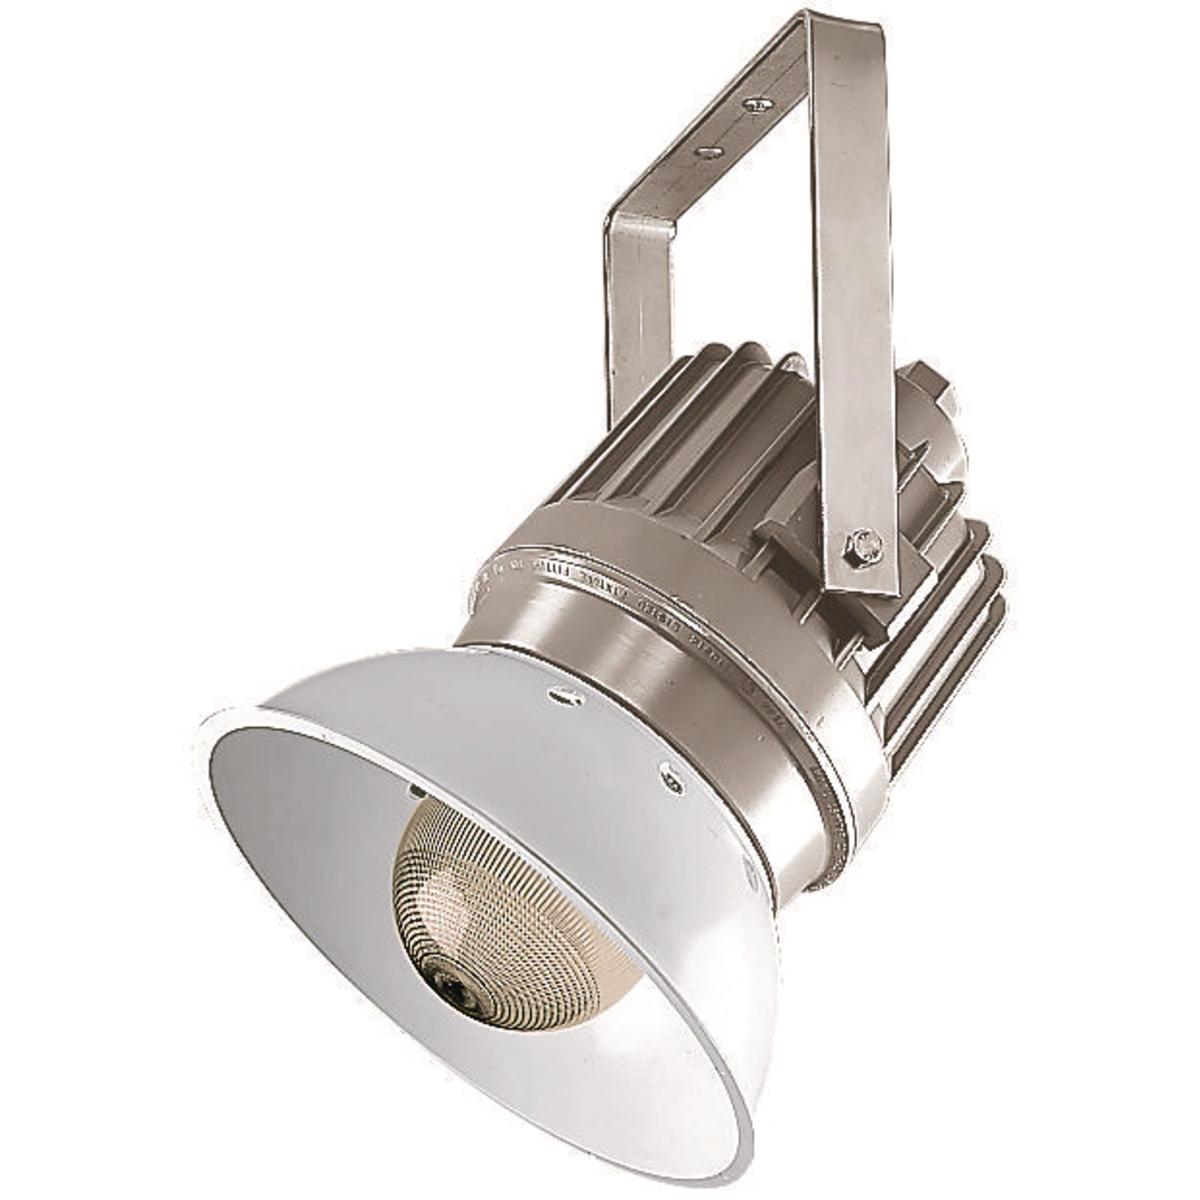 Hubbell EZS158A2-T Class I 150W High Pressure Sodium 3/4" Pendant with Trunnion Mount  ; Trunnion mounted–Trunnion yoke of 316 grade stainless steel attaches via mounting blocks to fixture ballast housing ; Factory sealed–No external seal needed ; Corrosion resistant–Fixtur